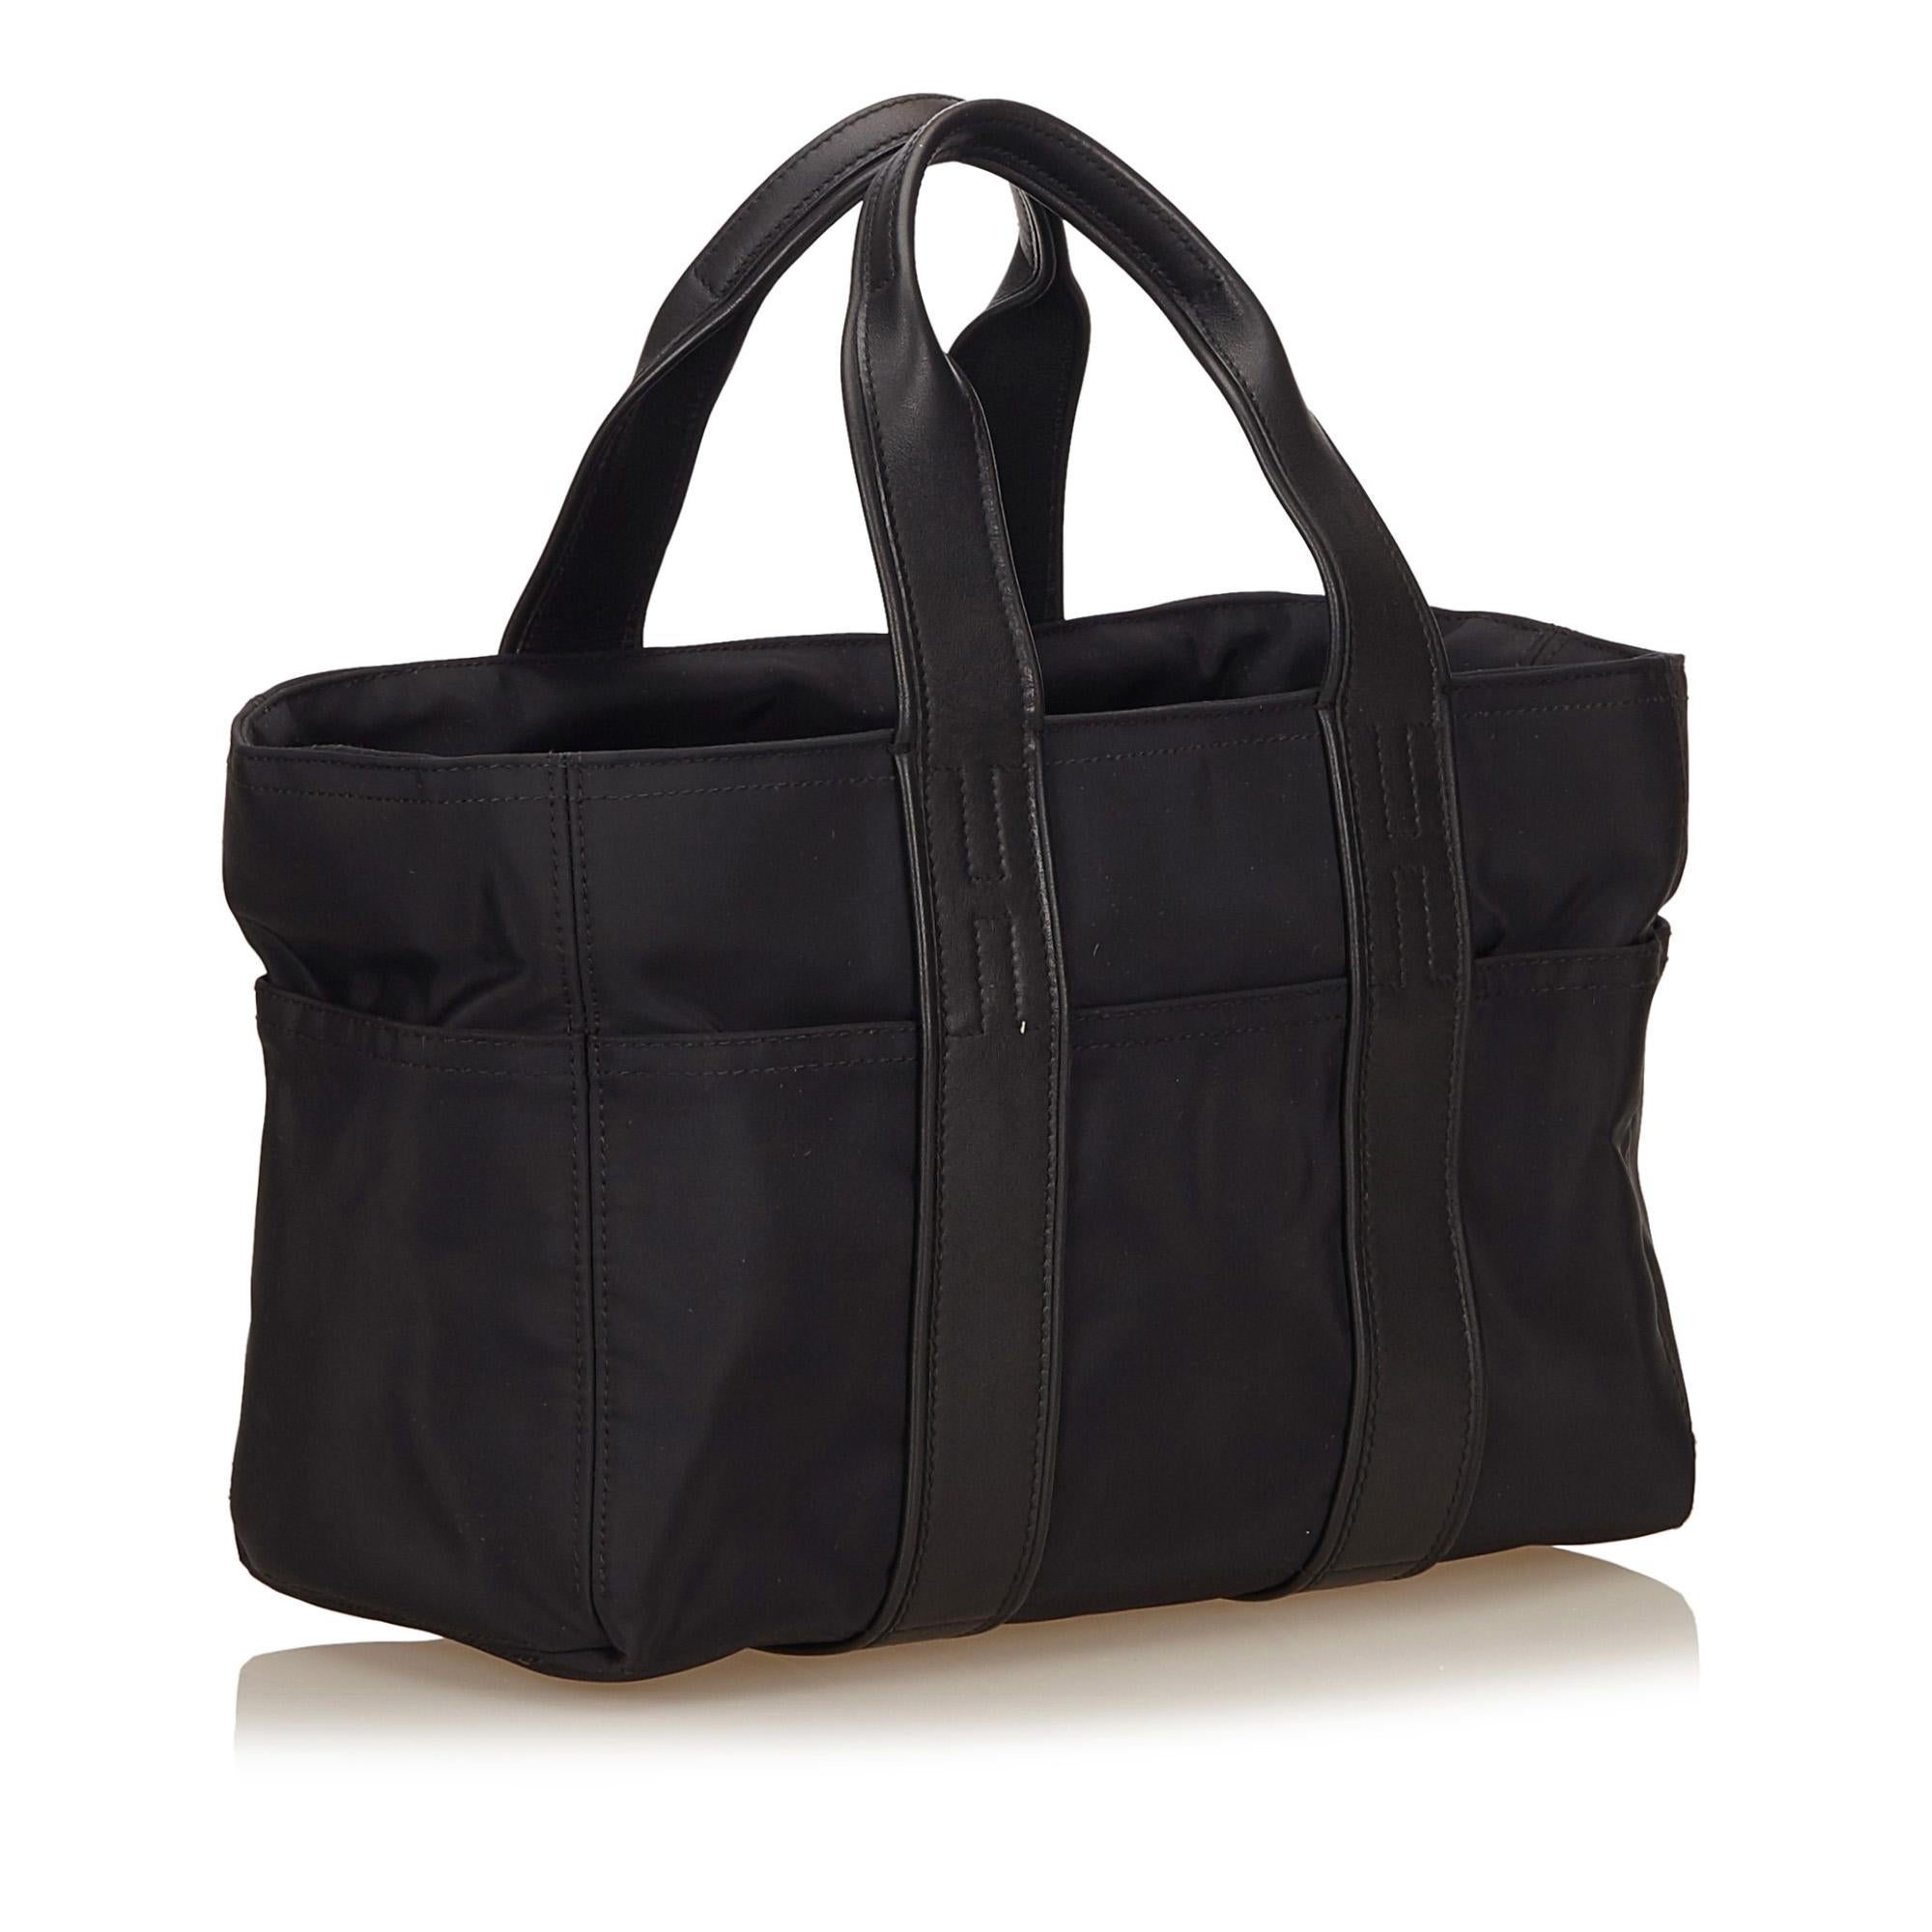 The Acapulco PM features a nylon leather, exterior slip pockets, flat leather straps, top zip closure, and interior zip pocket. It carries as B condition rating.

Inclusions: 
This item does not come with inclusions.

Dimensions:
Length: 35.00